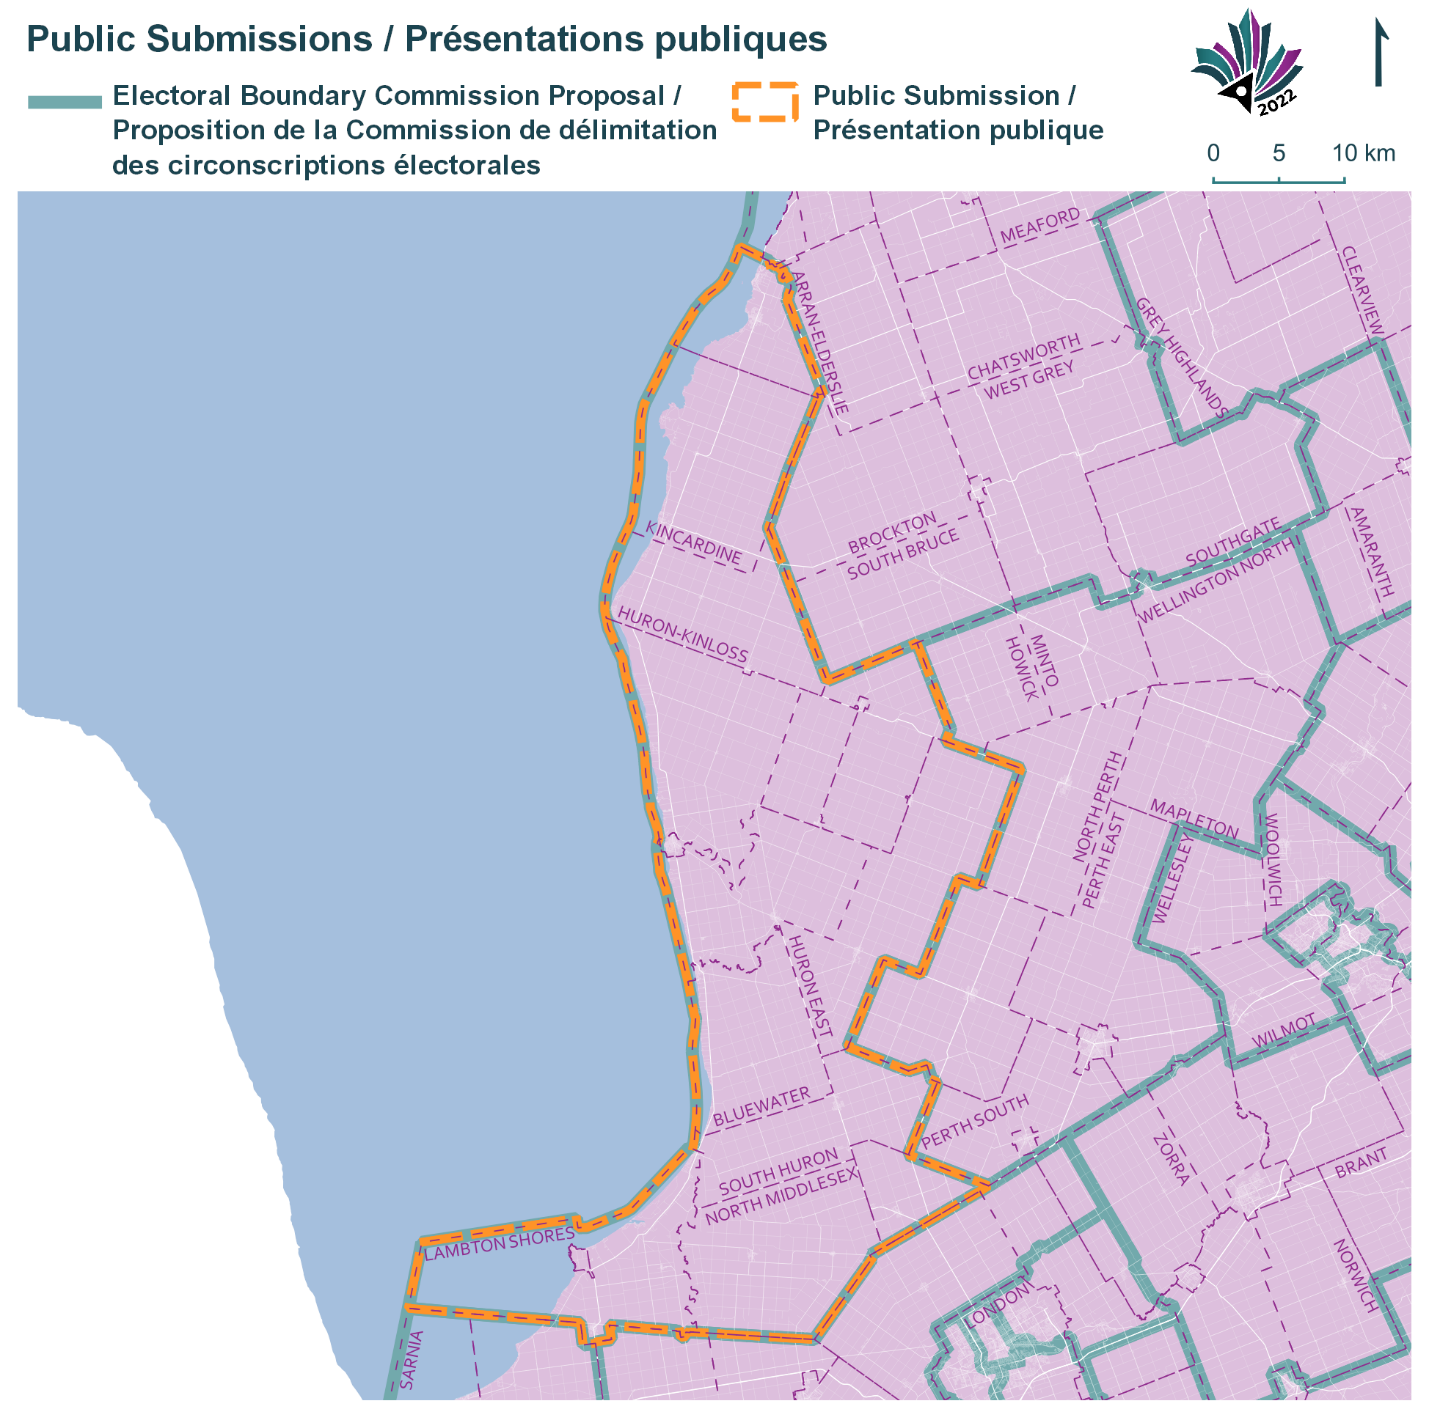 Image shows a map that is described in the written part of the submission. Public Submissions, Electoral Boundary Commission Proposal (Green lines), Public Submission (Yellow lines).